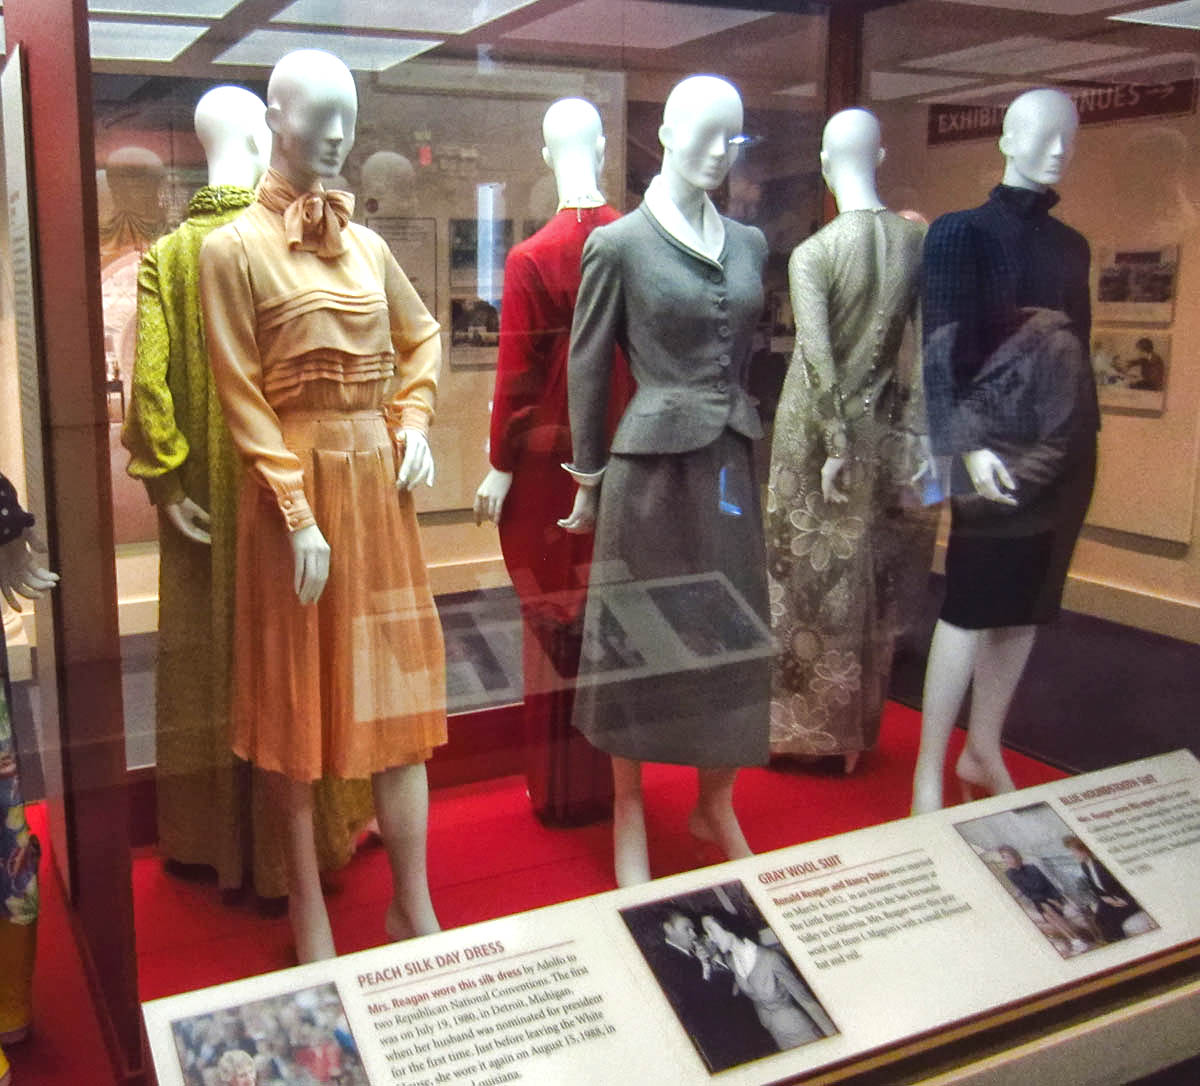 Nancy's fashions. The gray suit in the middle was her wedding suit from 1954. Nancy was a Size 4 Petite.